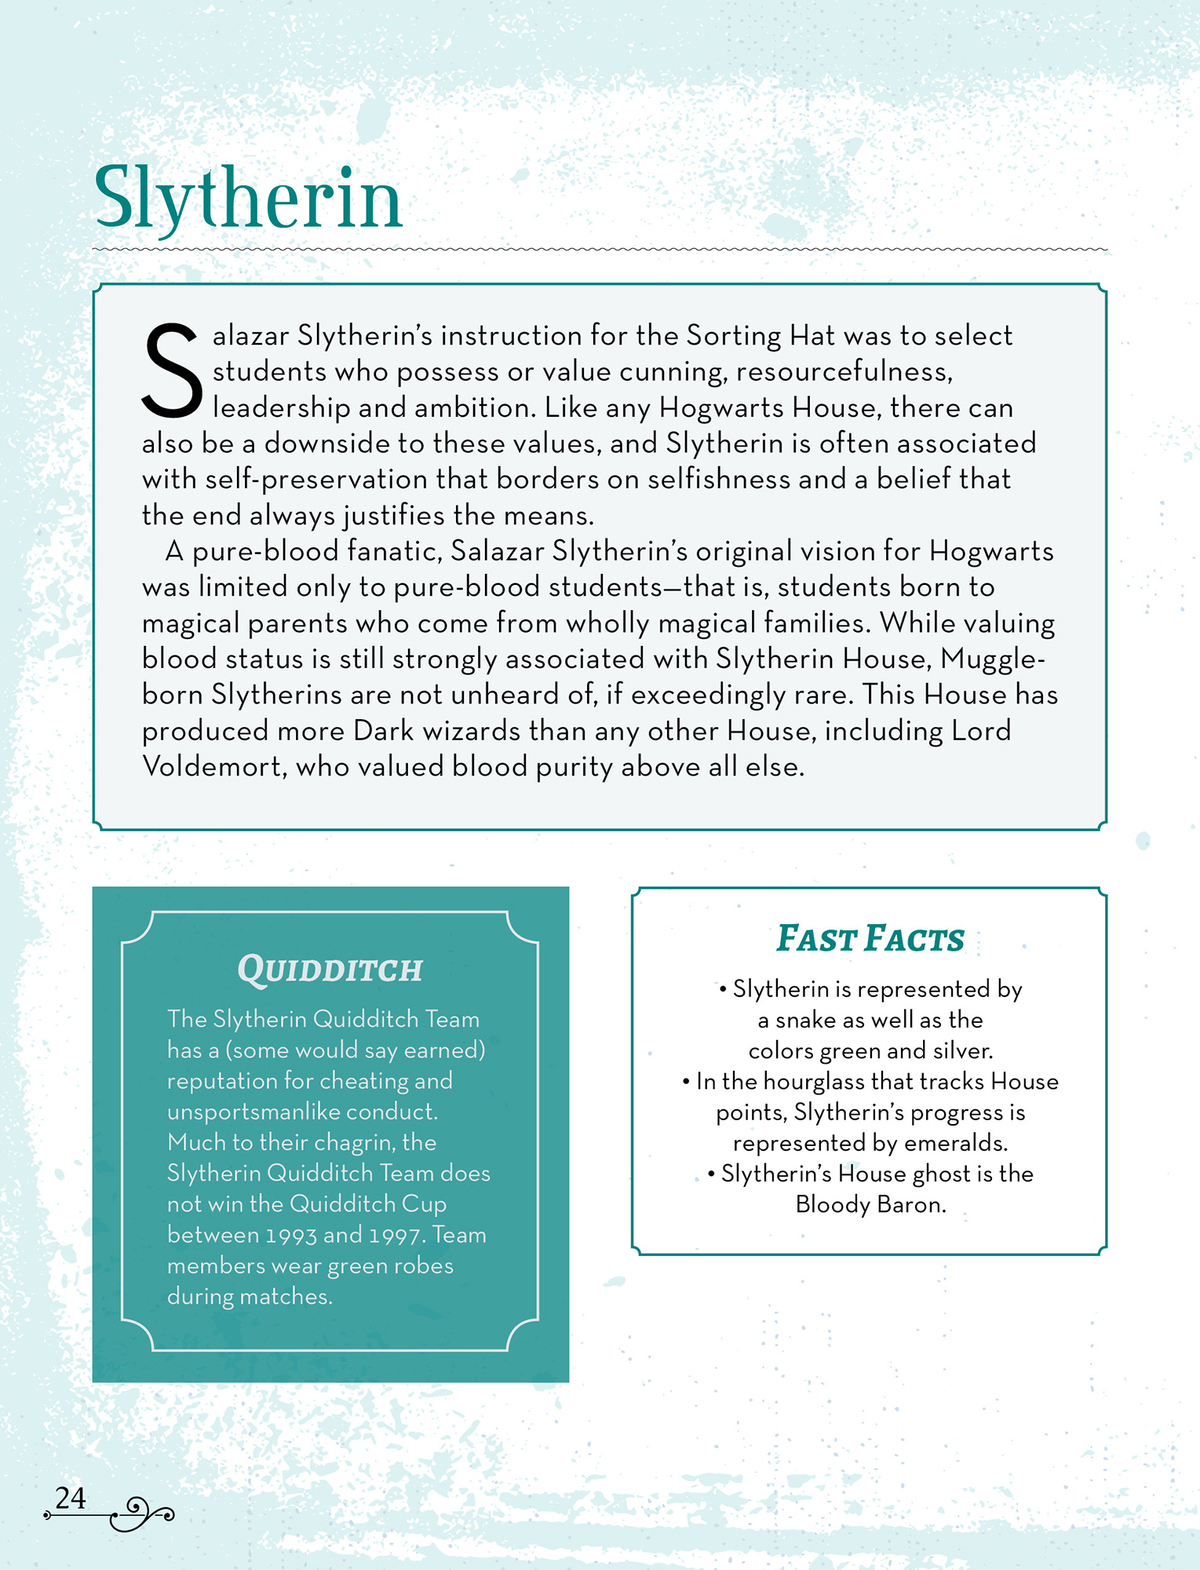 Slytherin page from “The Unofficial Harry Potter Hogwarts Handbook”